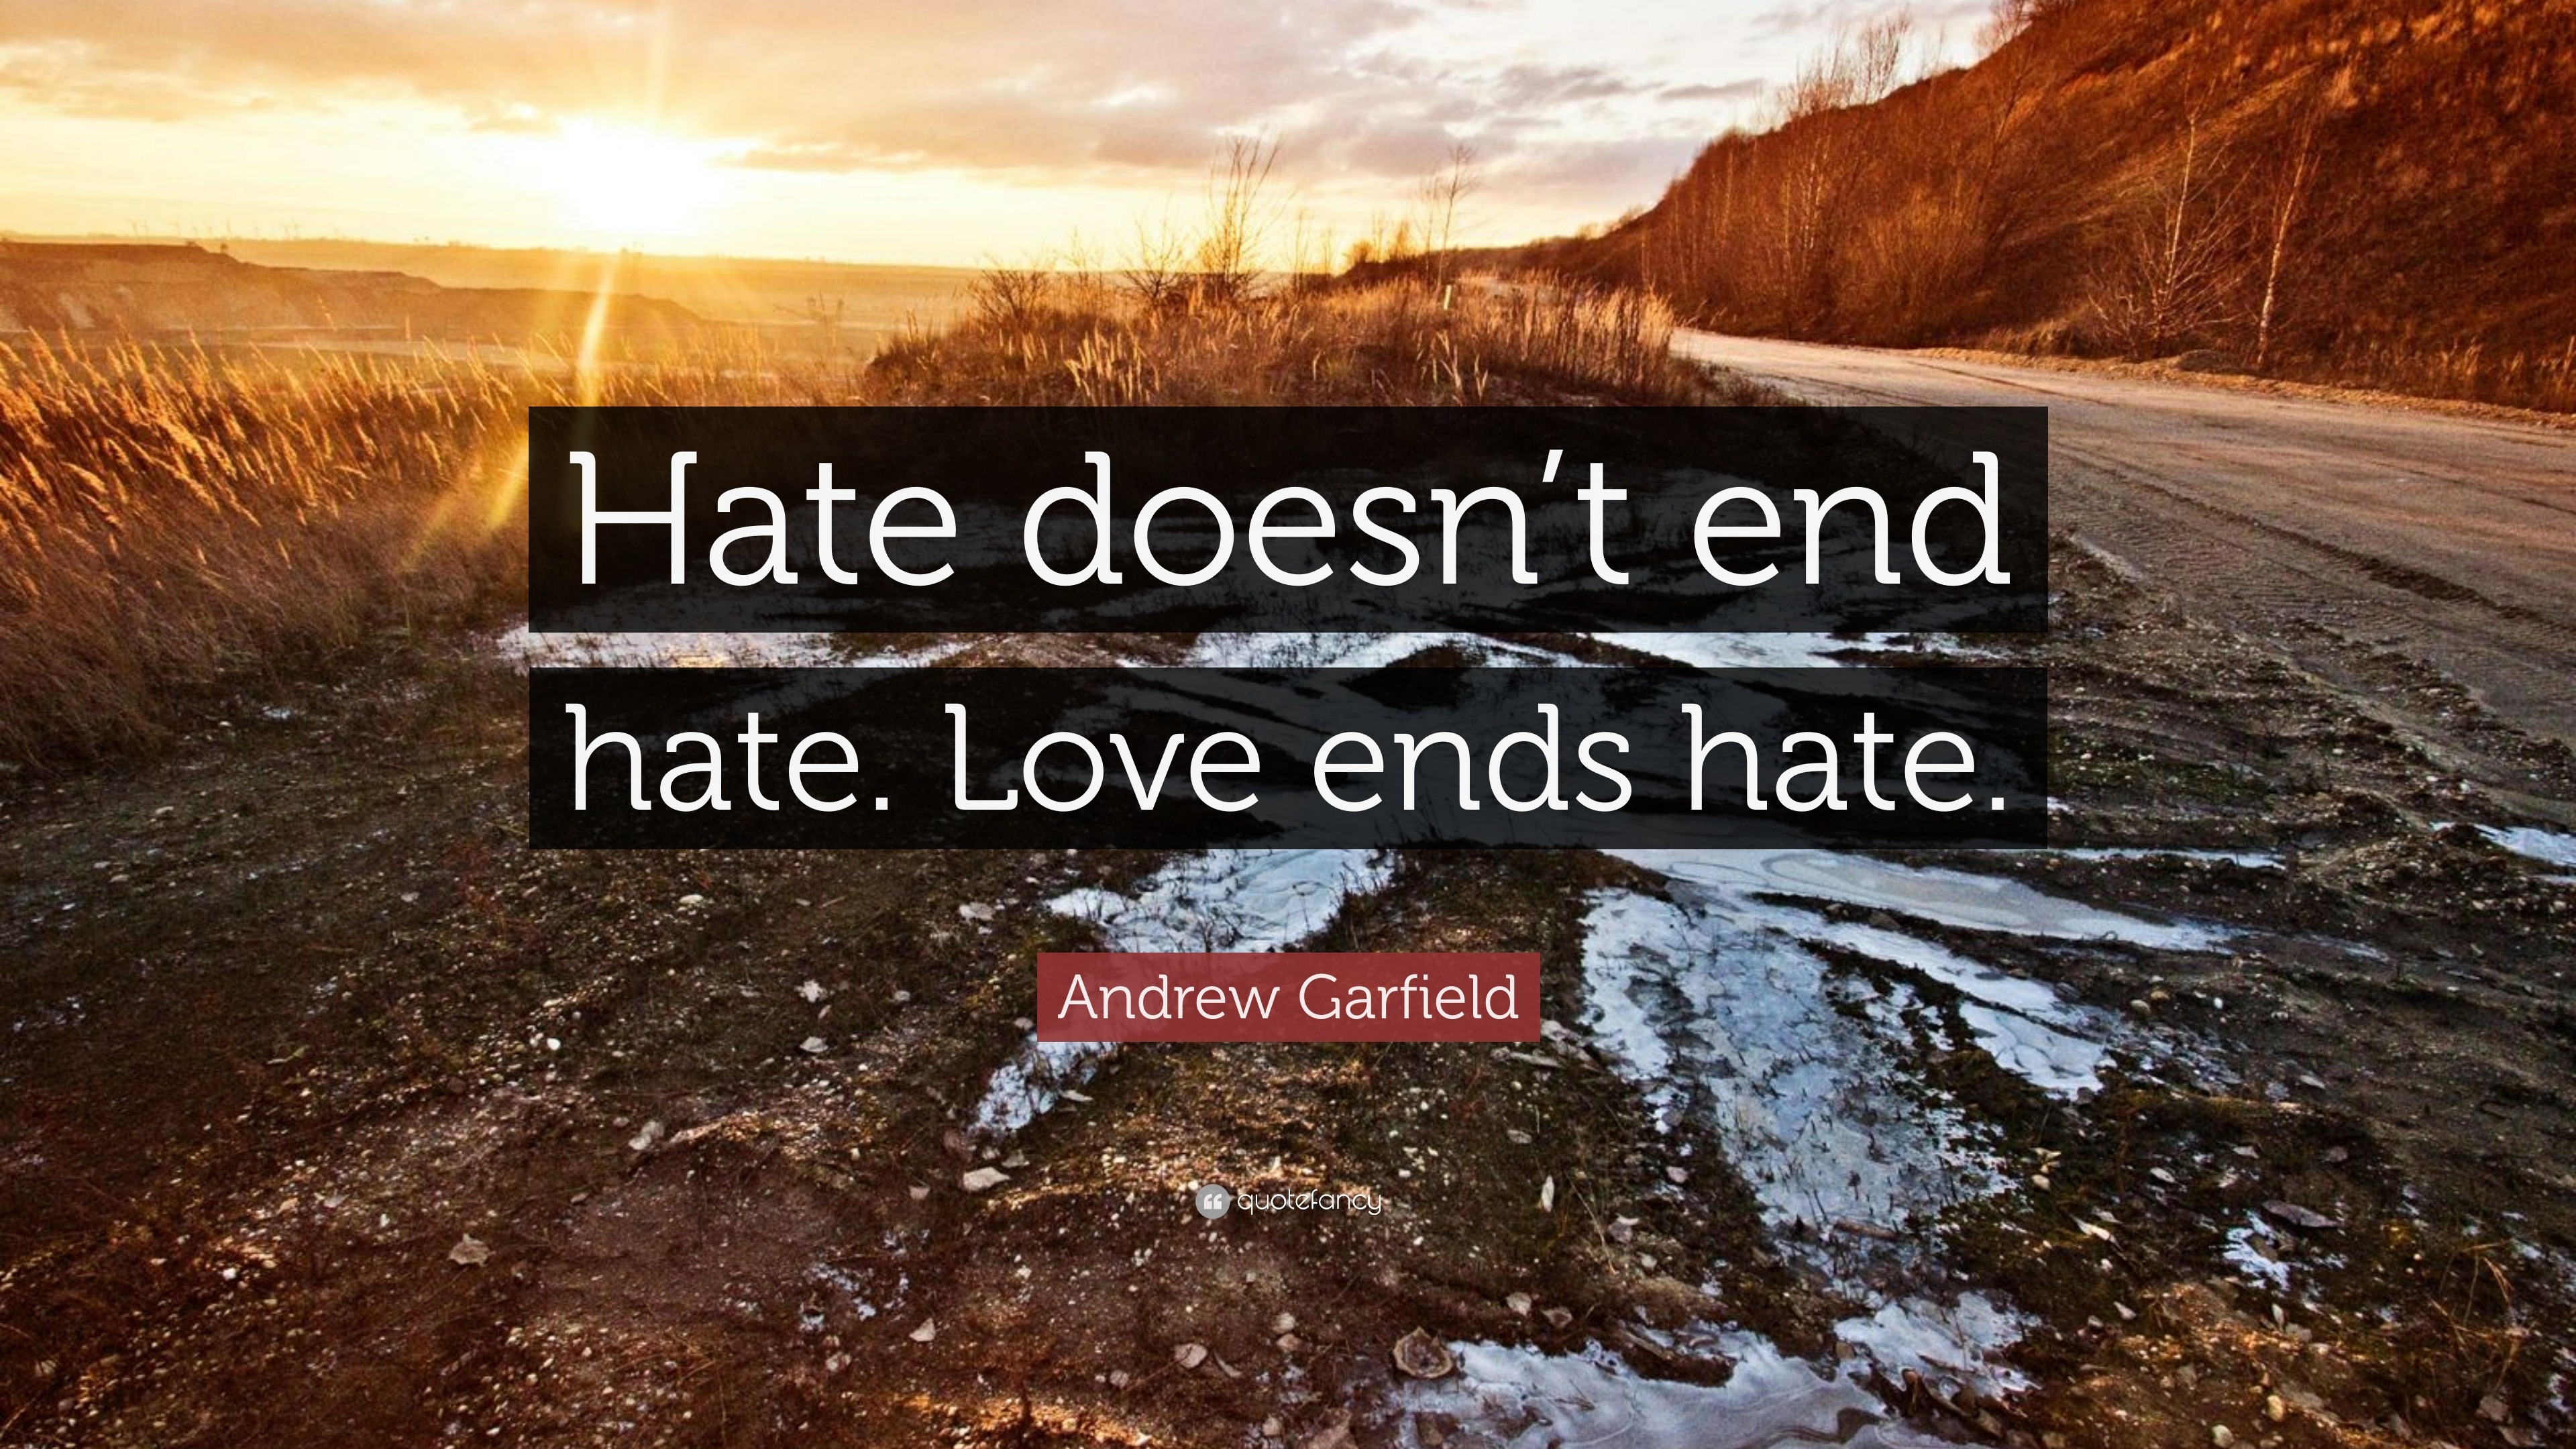 Andrew Garfield Quote “Hate doesn t end hate Love ends hate